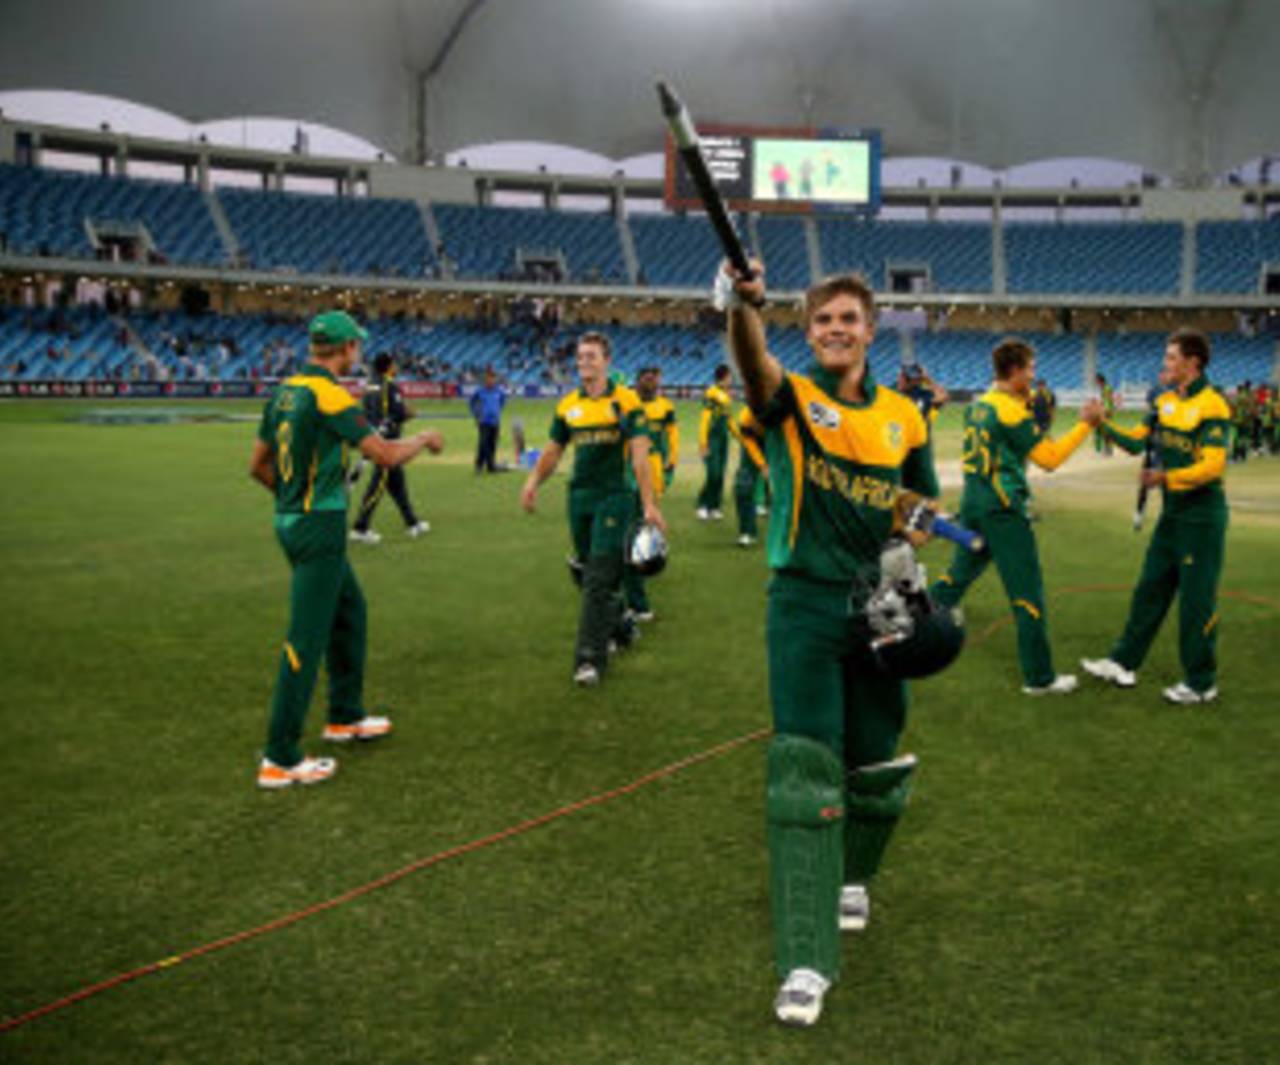 The fulcrum of South Africa's campaign, culminating in a mature knock in the final, was the captain Aiden Markram&nbsp;&nbsp;&bull;&nbsp;&nbsp;ICC